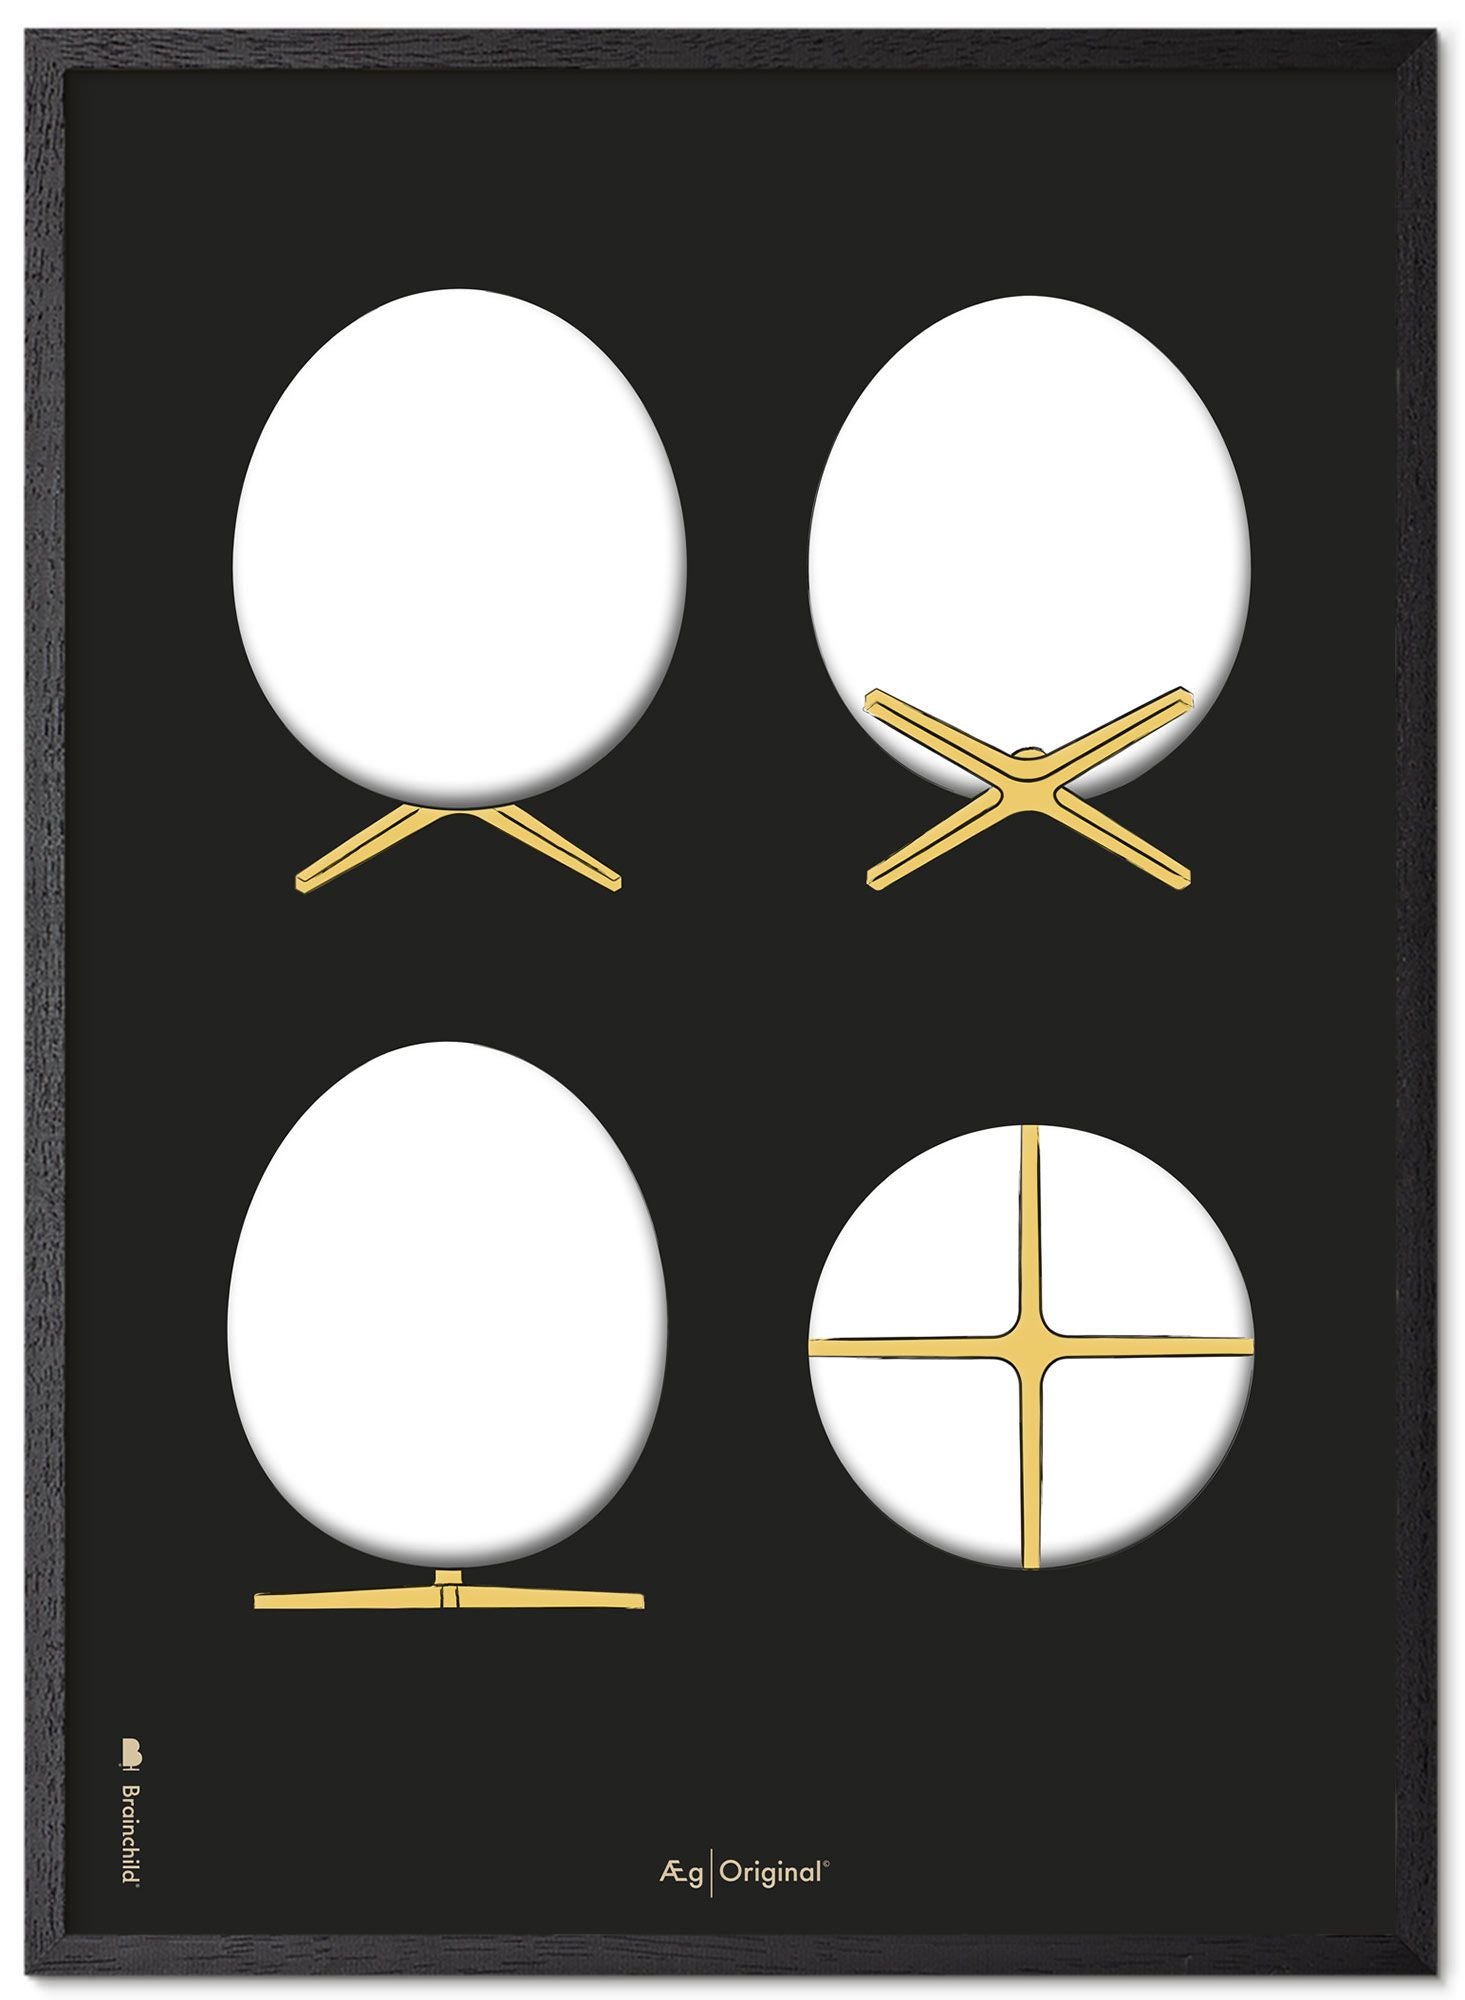 Brainchild The Egg Design Sketches Poster Frame Made Of Black Lacquered Wood A5, Black Background